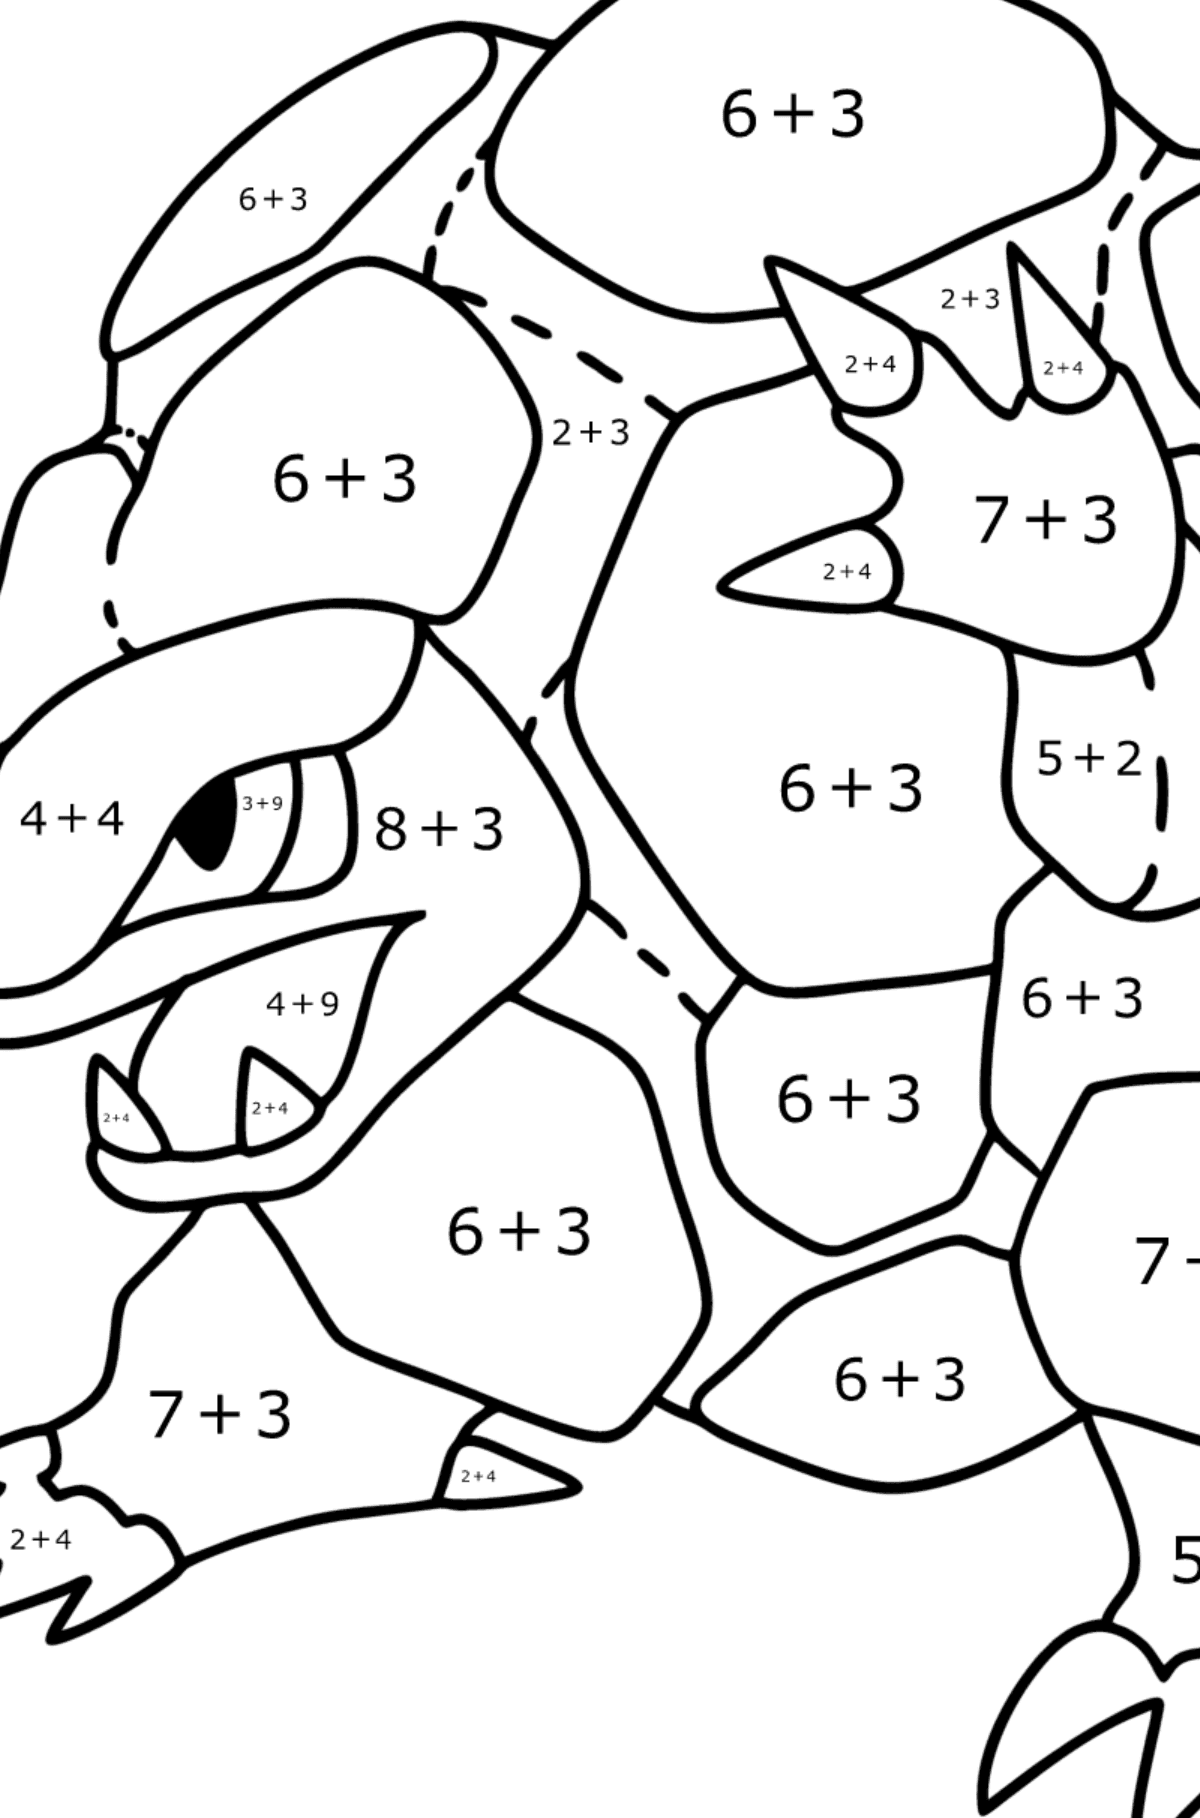 Pokemon Go Golem coloring page - Math Coloring - Addition for Kids